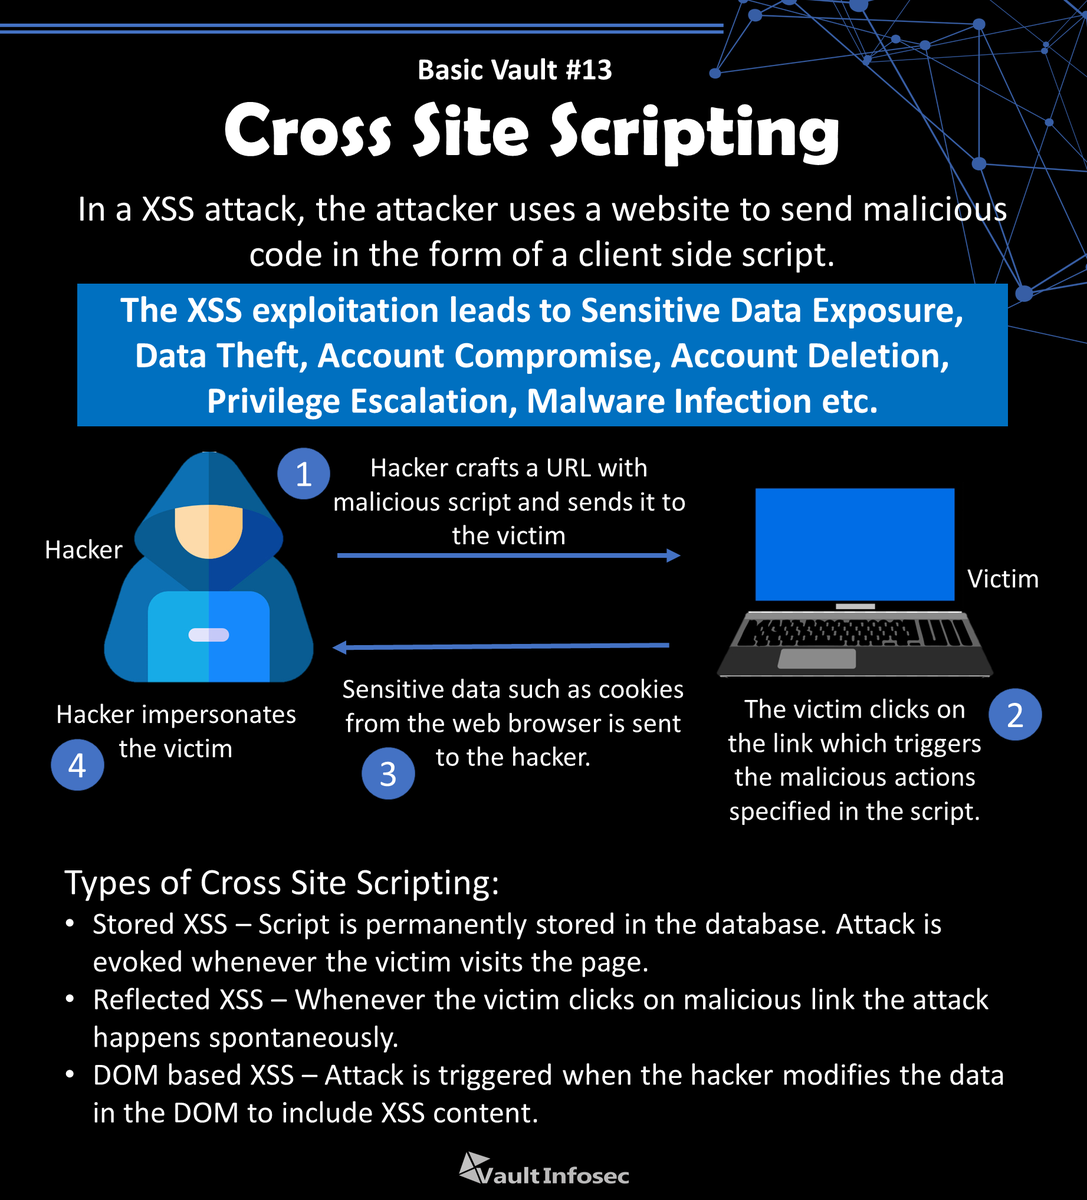 Cross Site Scripting (XSS) - Old, yet a major threat.
#cybersecurity #informationsecurity #informationtechnology #security #vaultinfosec #wevowyoursecurity #crosssitescripting #injection #XSS #attack #hacking #basics